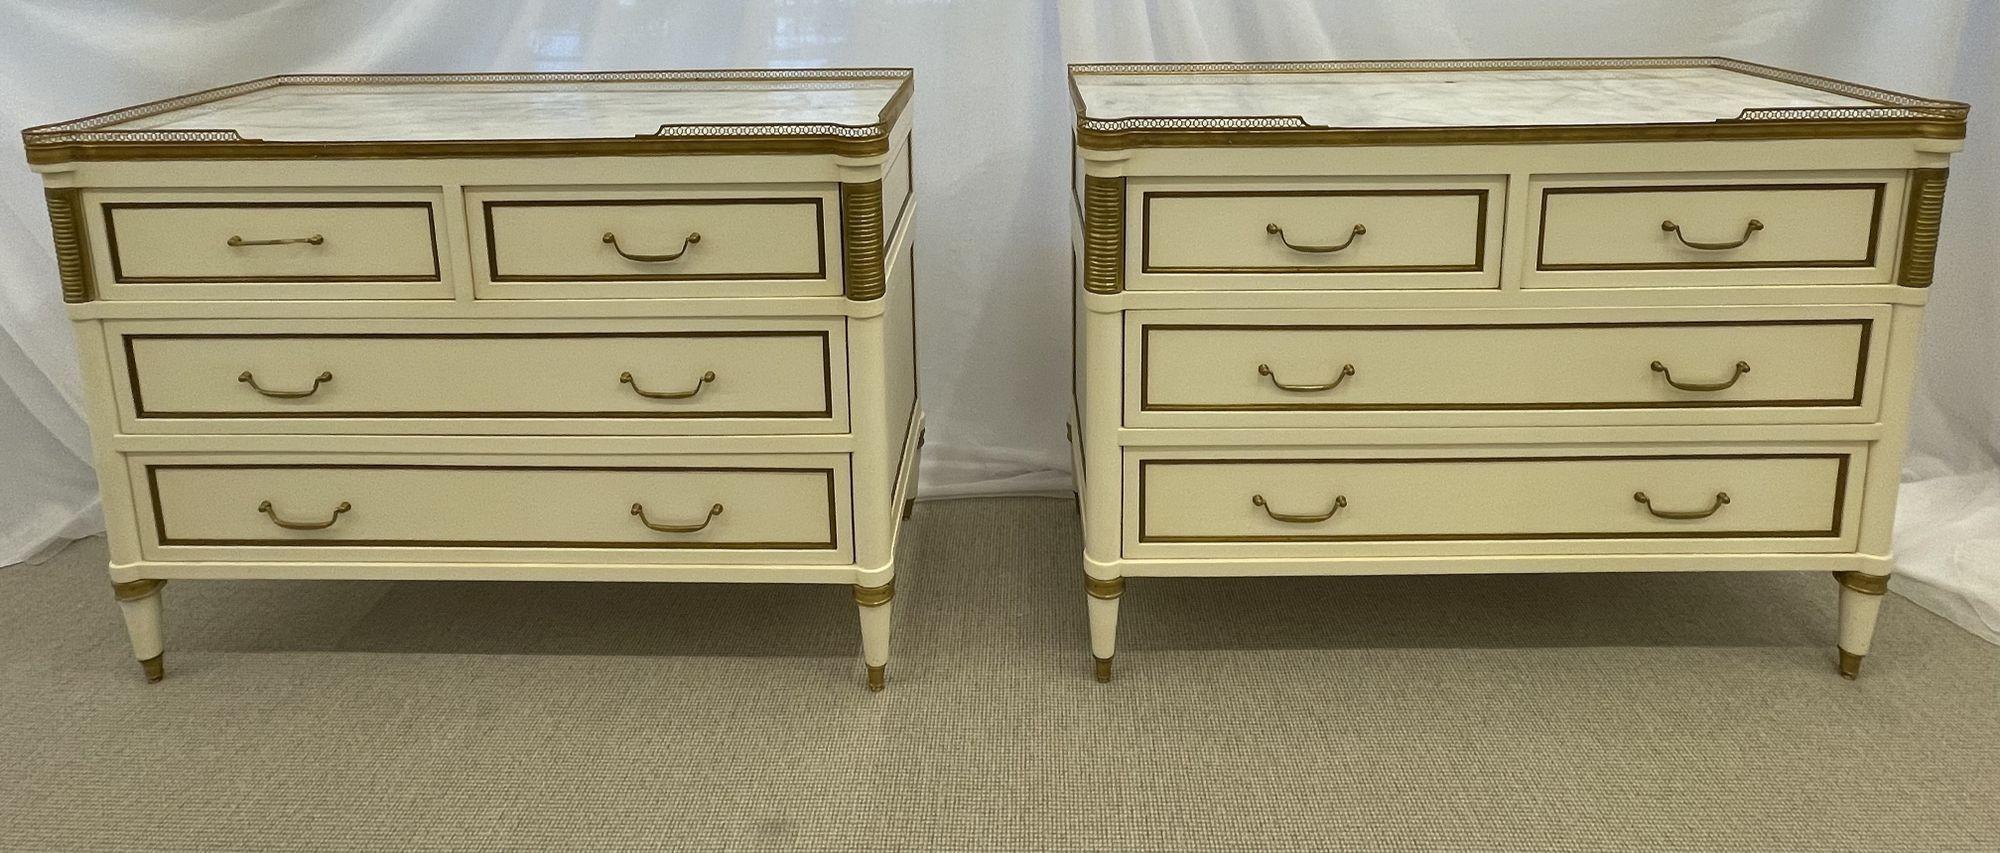 Pair of Cream Painted Louis XVI Style Commodes, nightstands, dressers, chests. Maison Jansen in Style
 
Stunning pair of Marble Top Hollywood Regency Style Commodes or Chests. Each having two drawers over two larger drawers under a pierced bronze